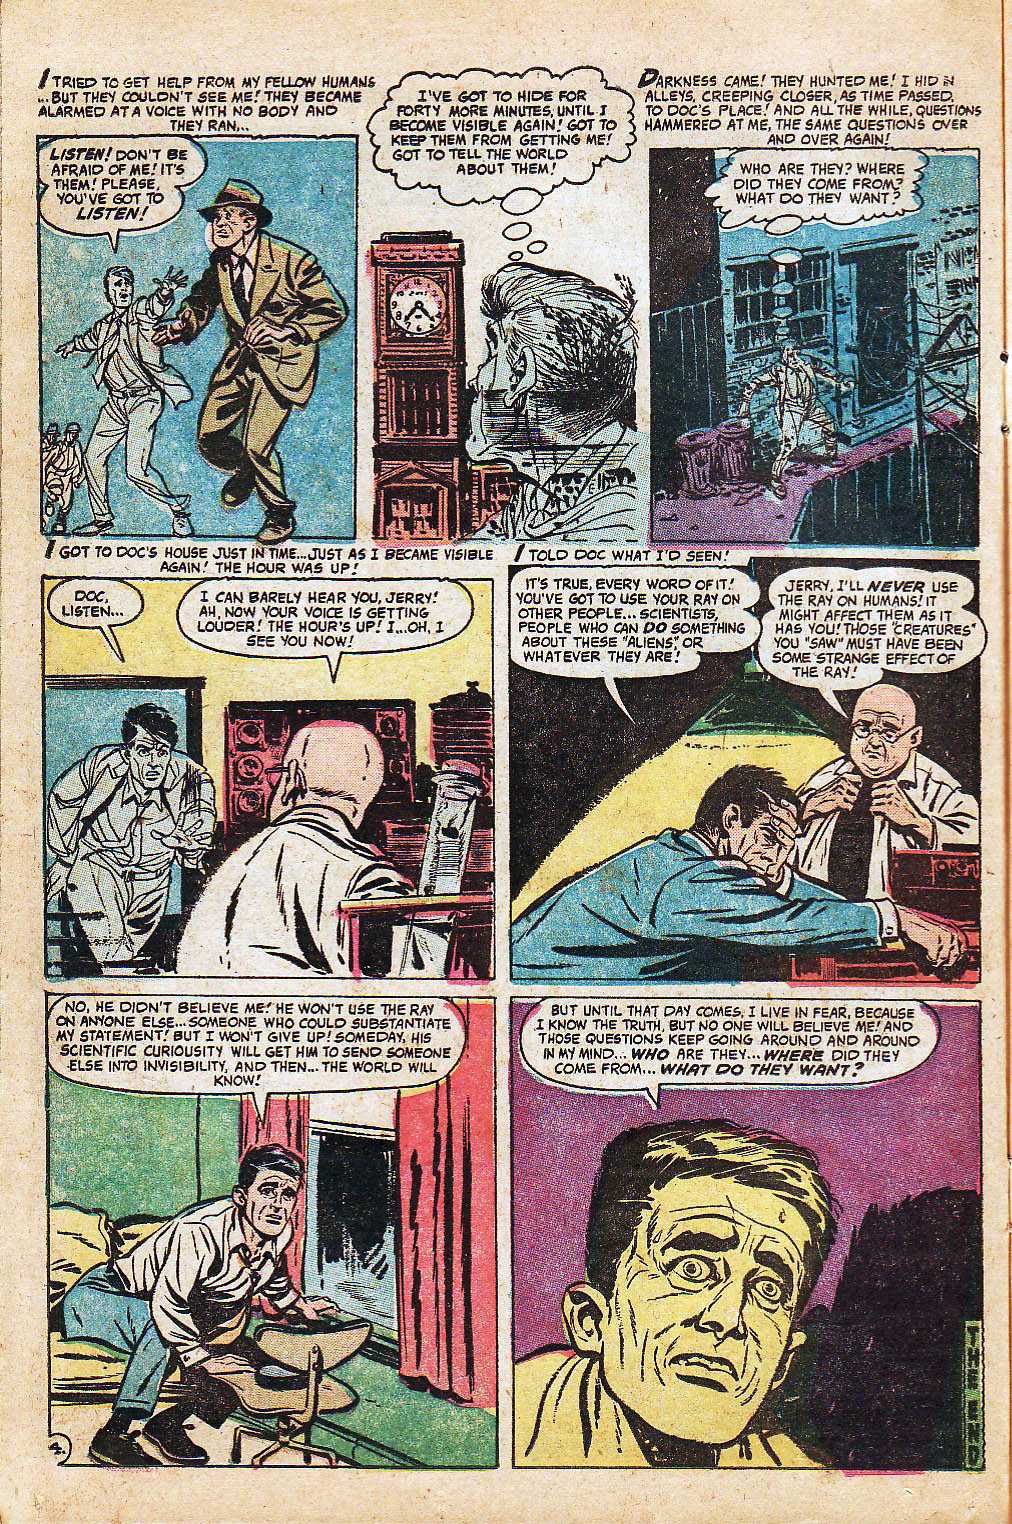 Marvel Tales (1949) 154 Page 11